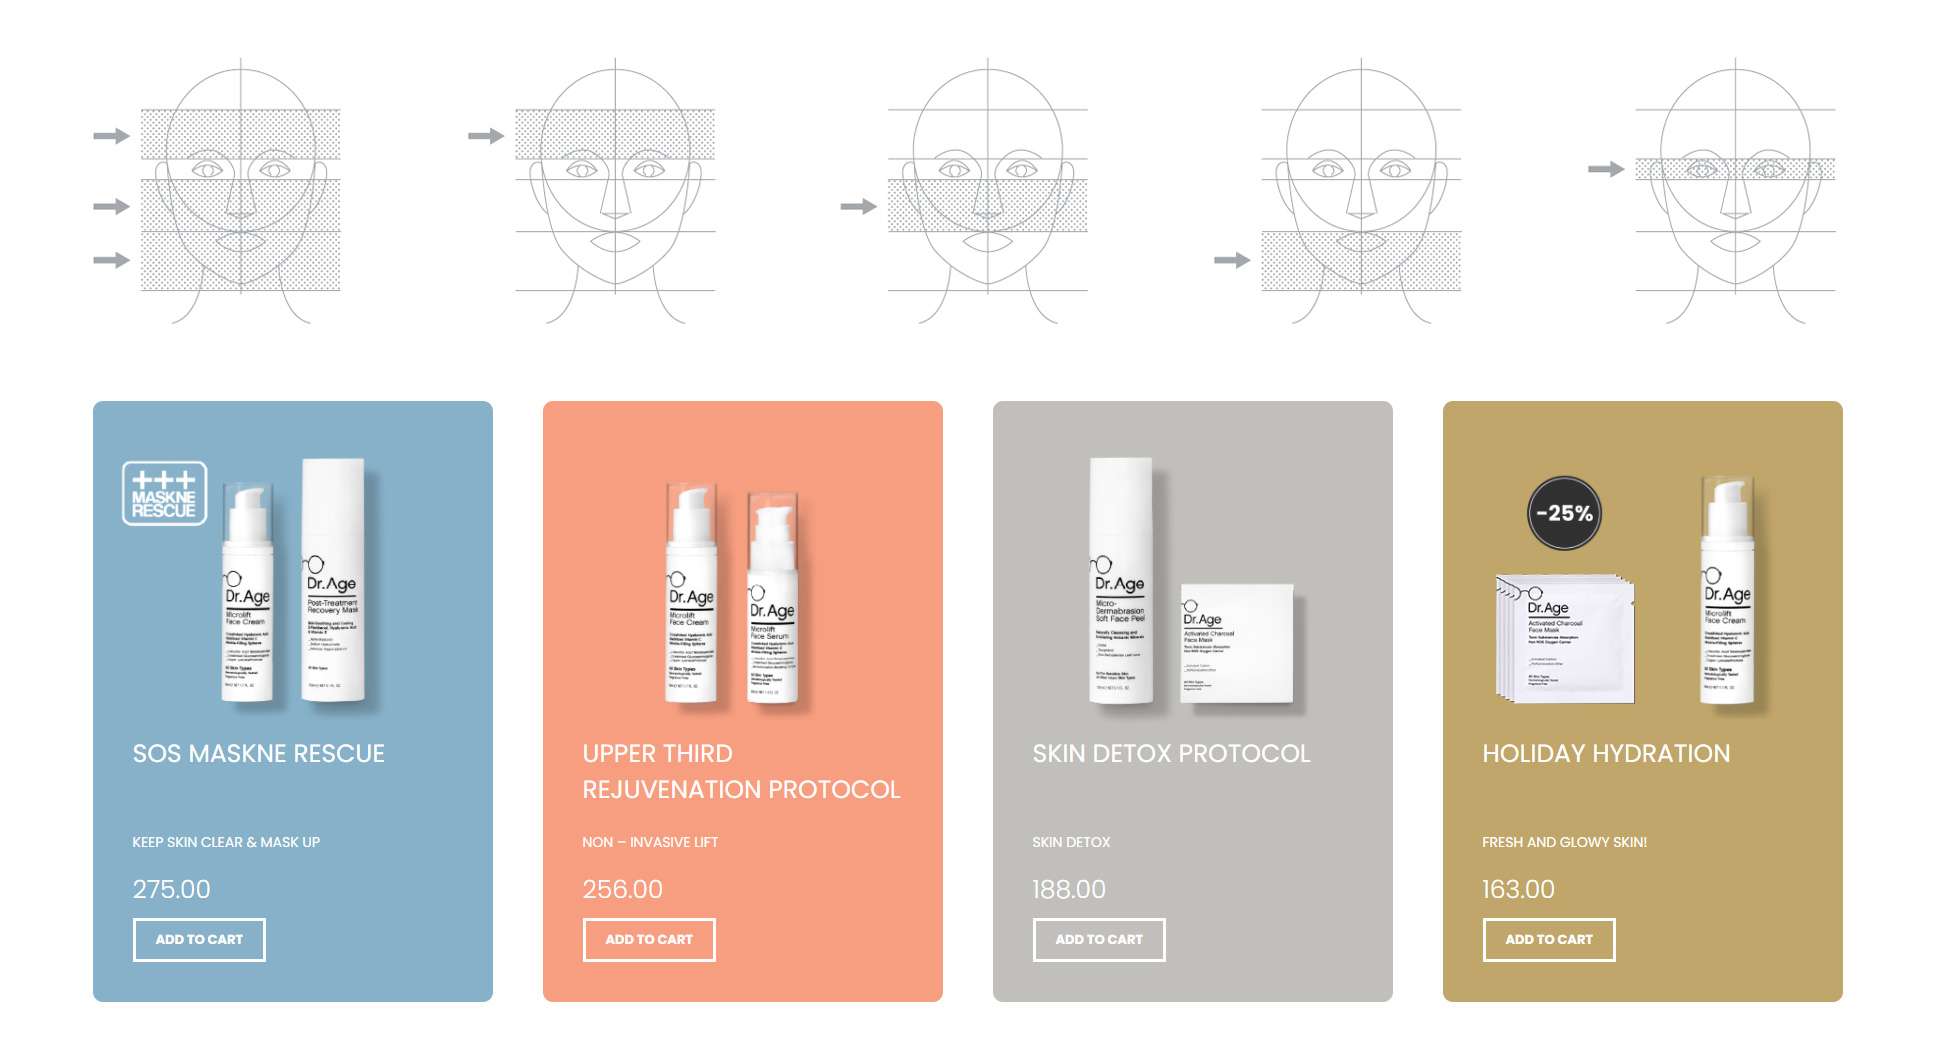 Rule of thirds & Dr. Age Protocols COSMETICS